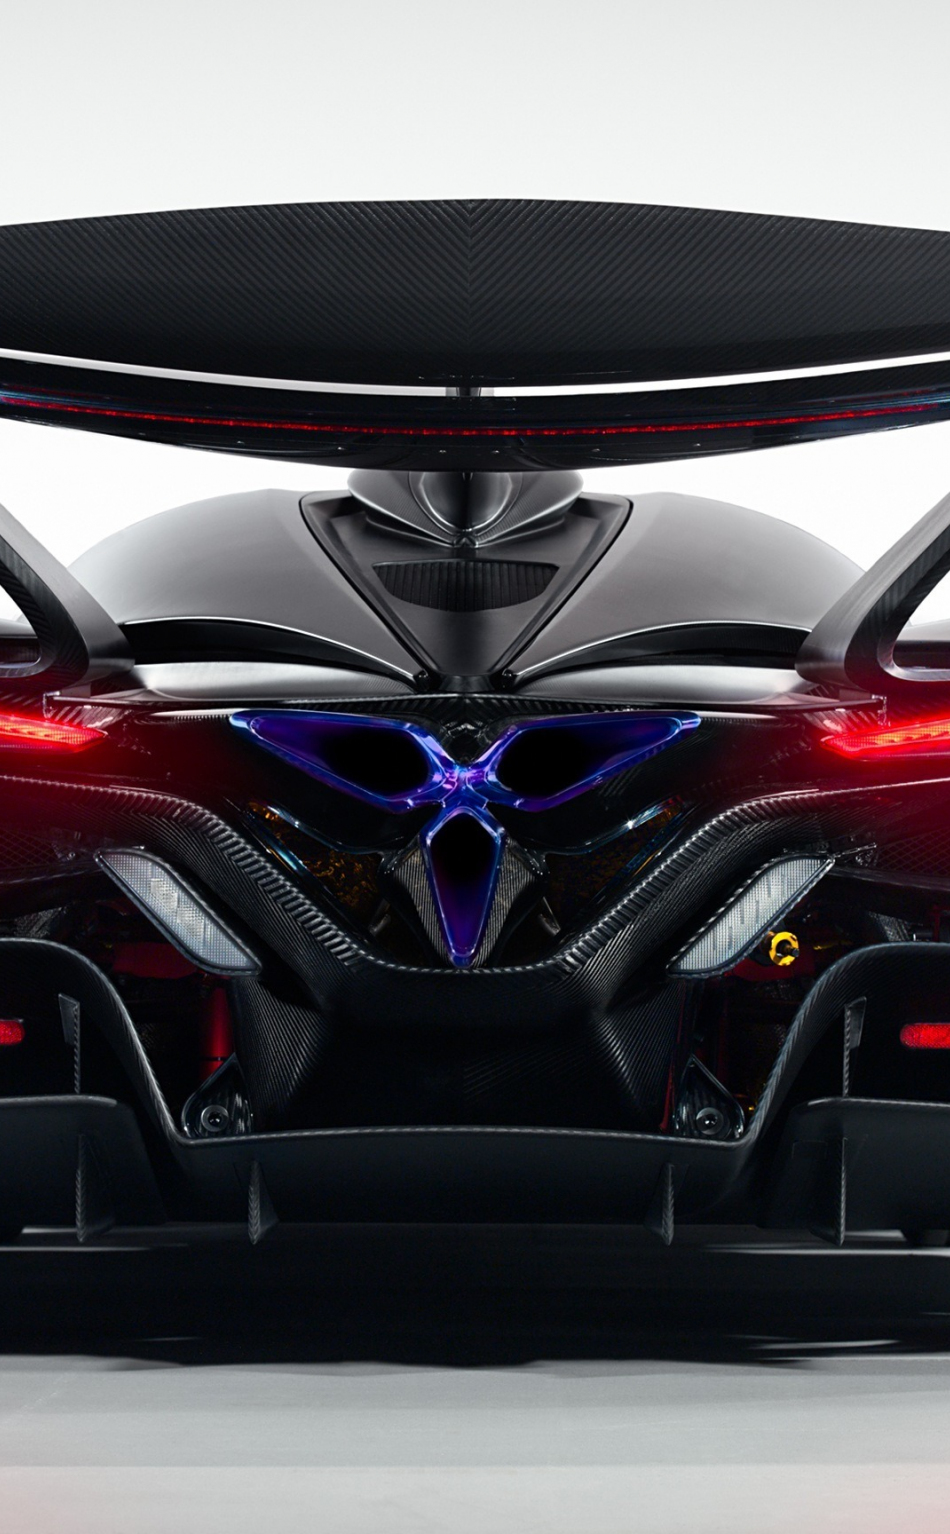 Apollo Intensa Emozione HD Cars 4k Wallpapers Images Backgrounds  Photos and Pictures